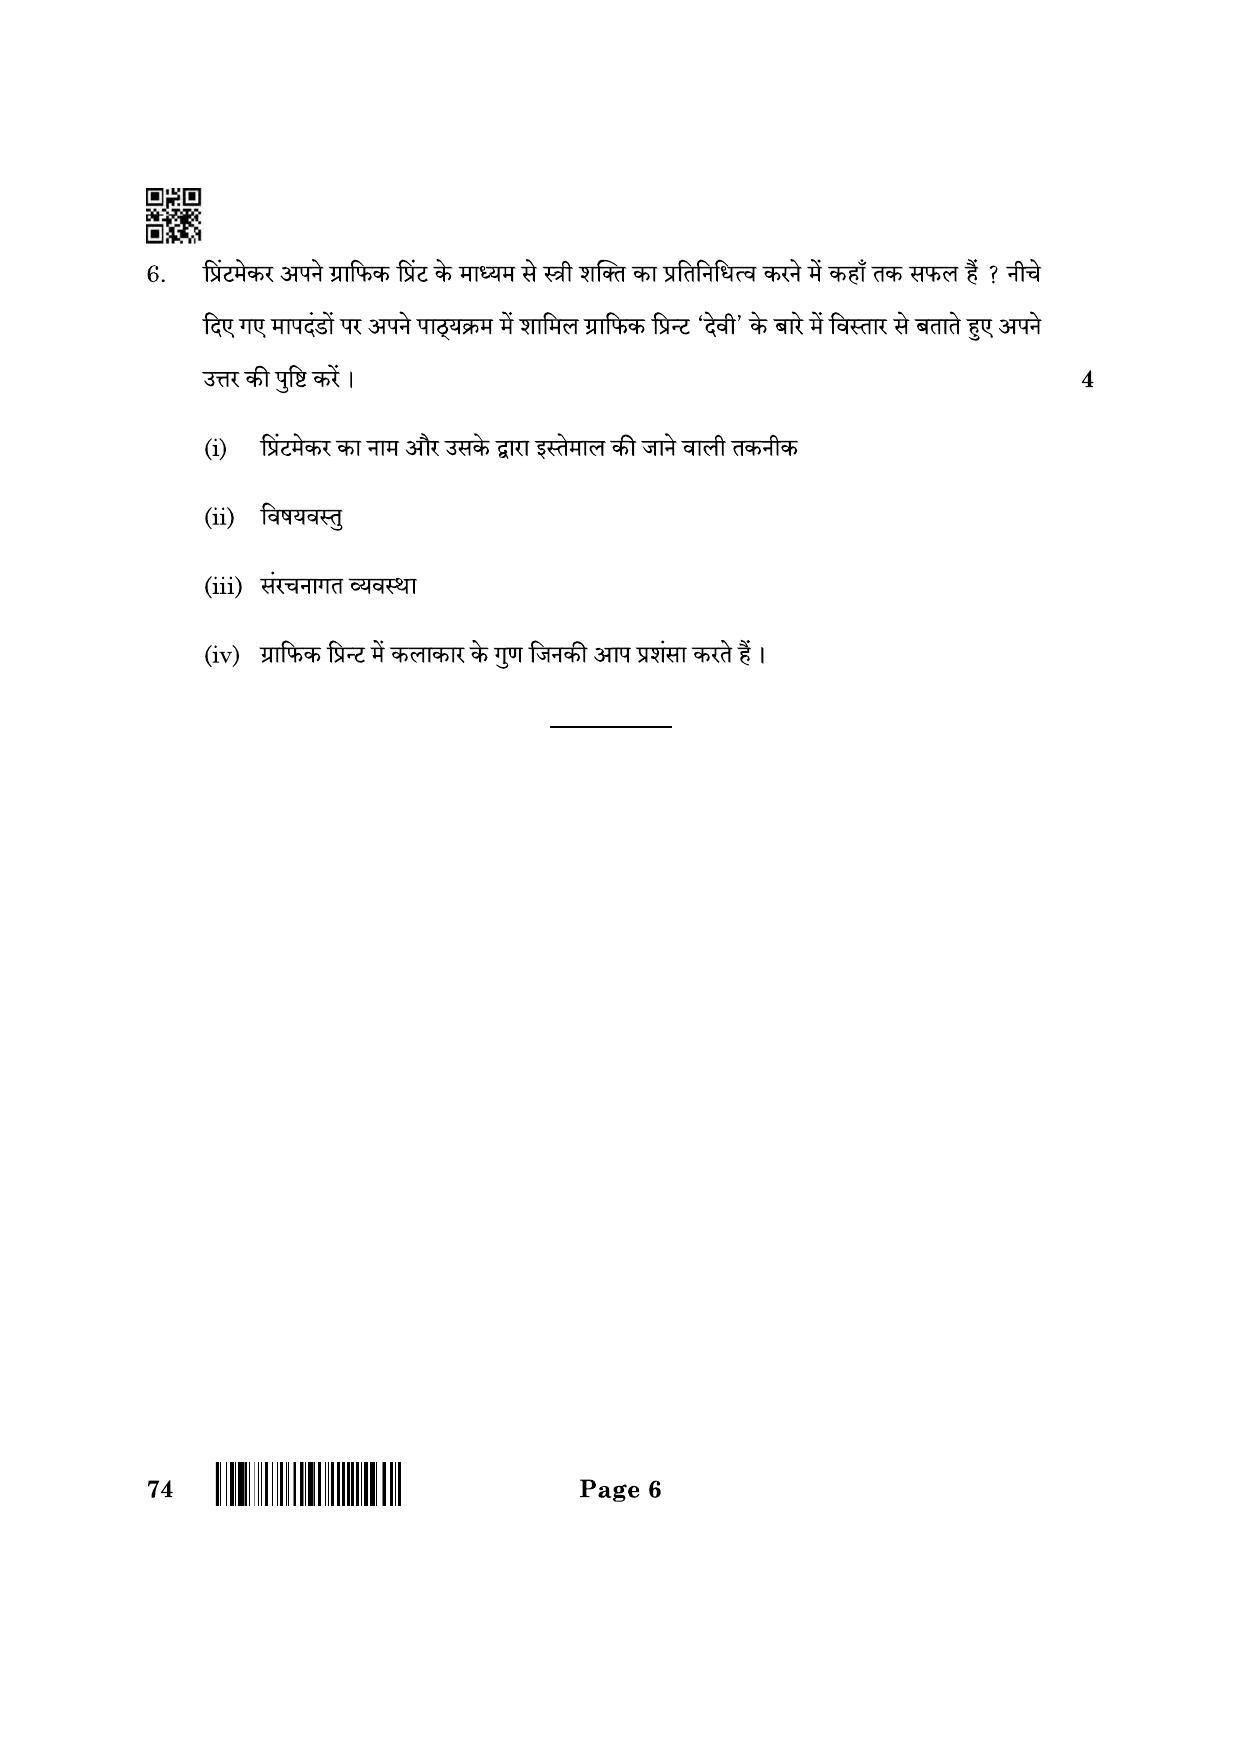 CBSE Class 12 74_Graphics 2022 Question Paper - Page 6